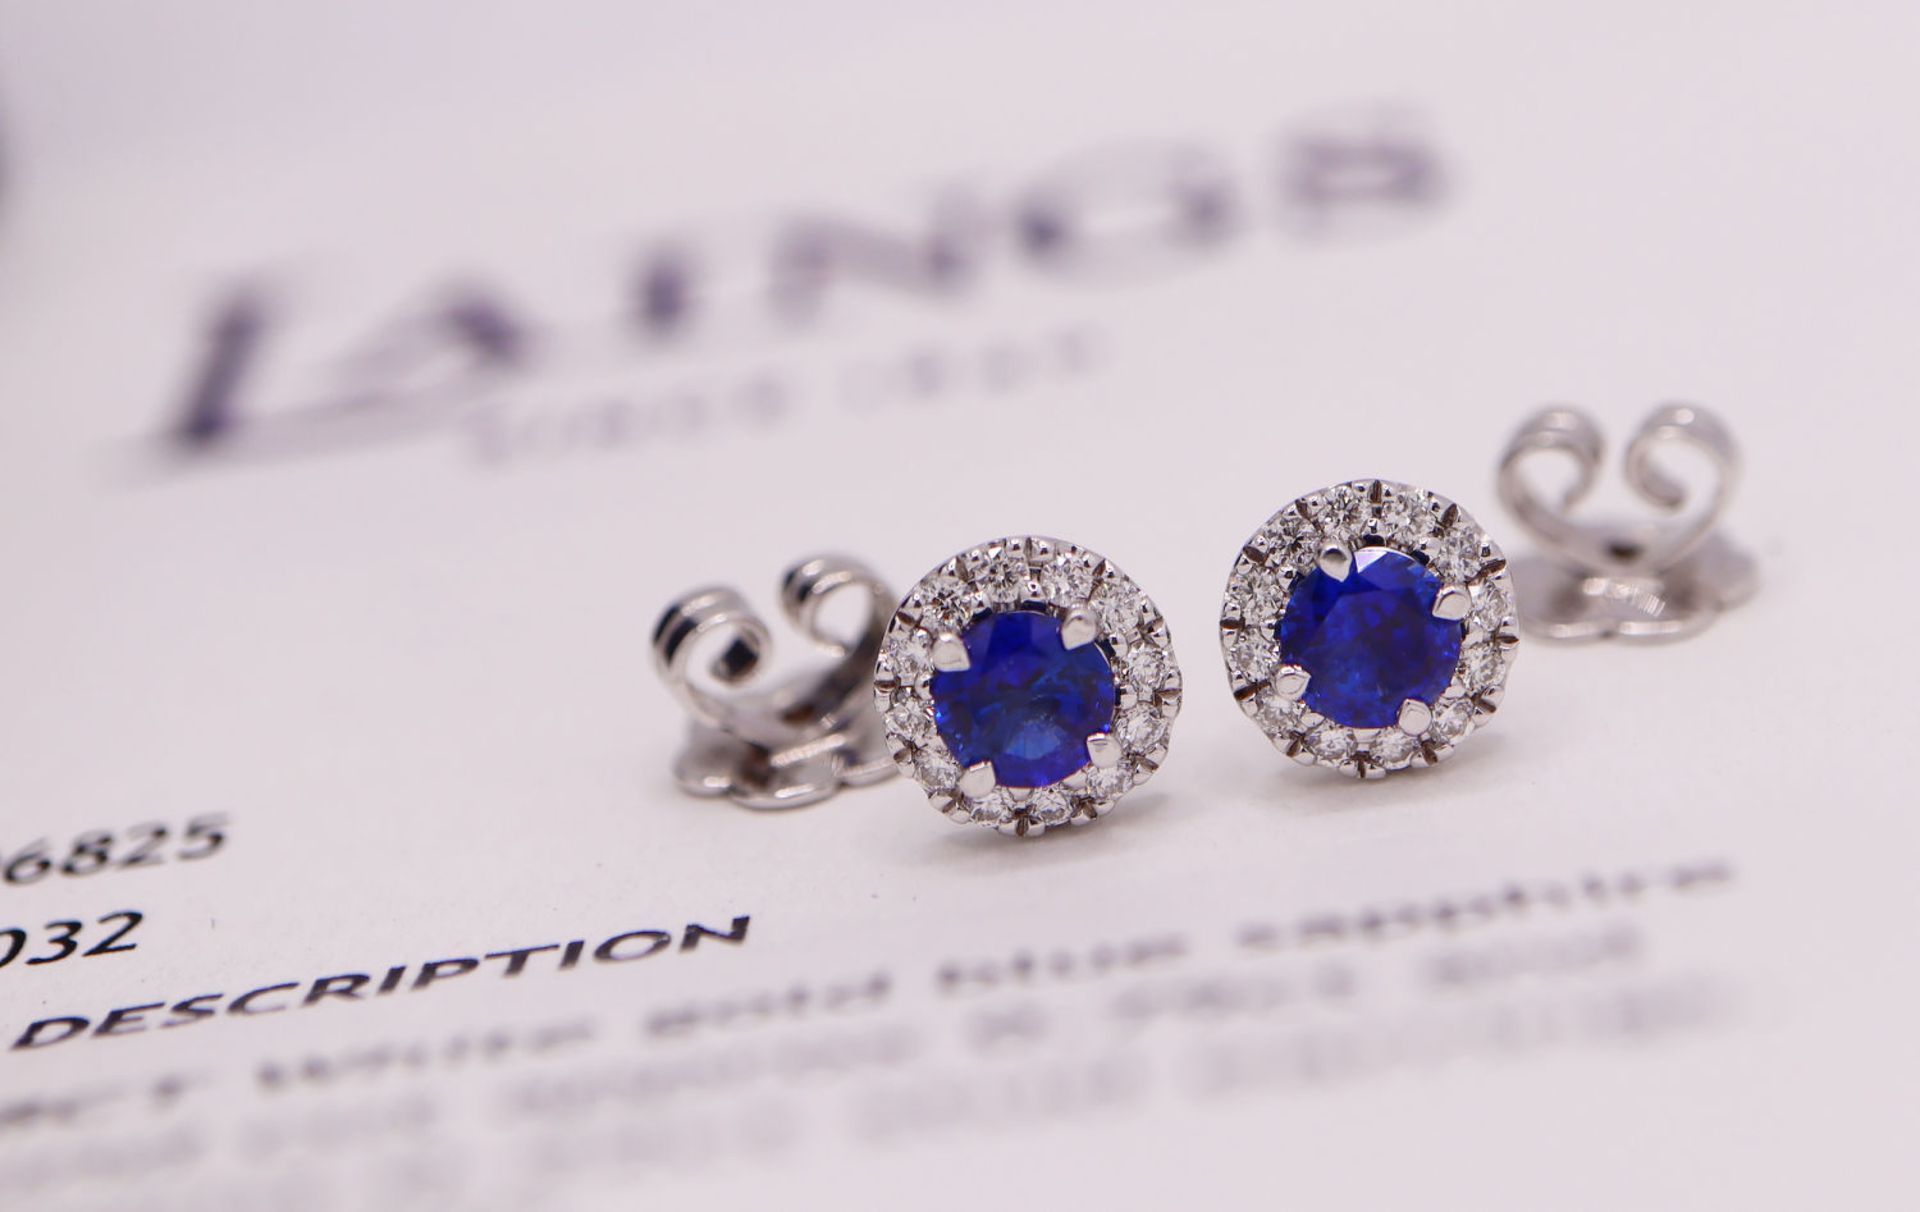 18K WHITE GOLD - 1.01CT SAPPHIRE & DIAMOND STUD EARRINGS; with LAINGS Original Receipt / Certificate - Image 2 of 8